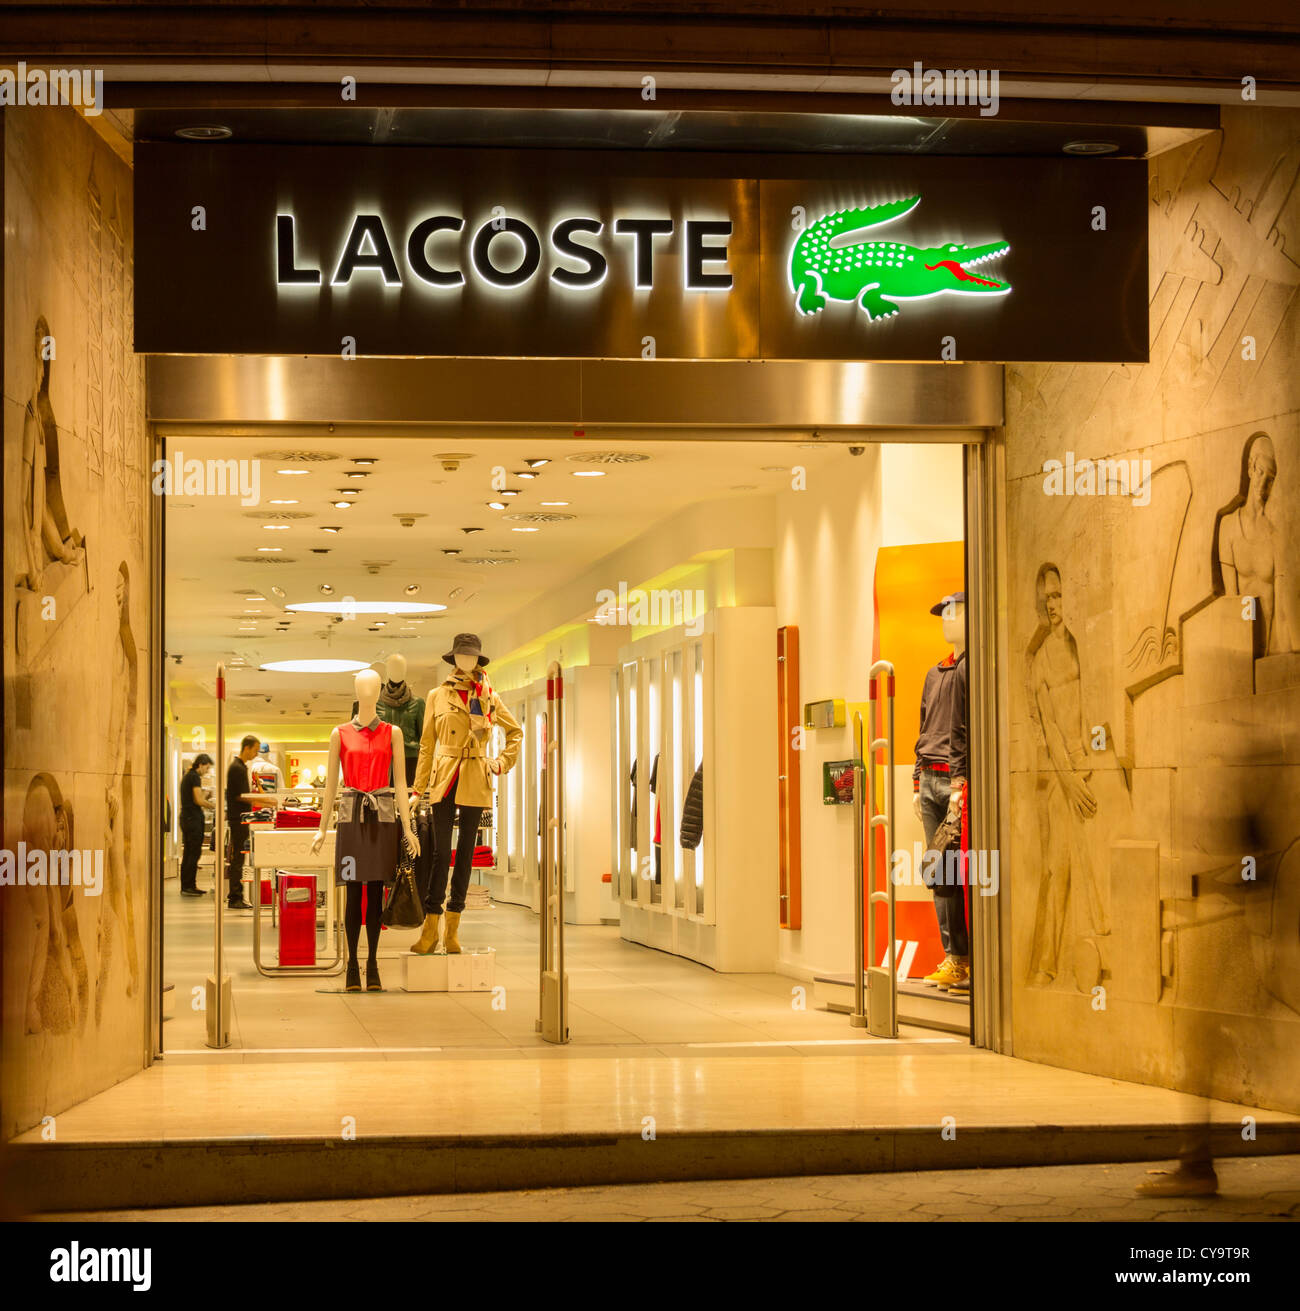 Lacoste store in Spain Stock Photo - Alamy